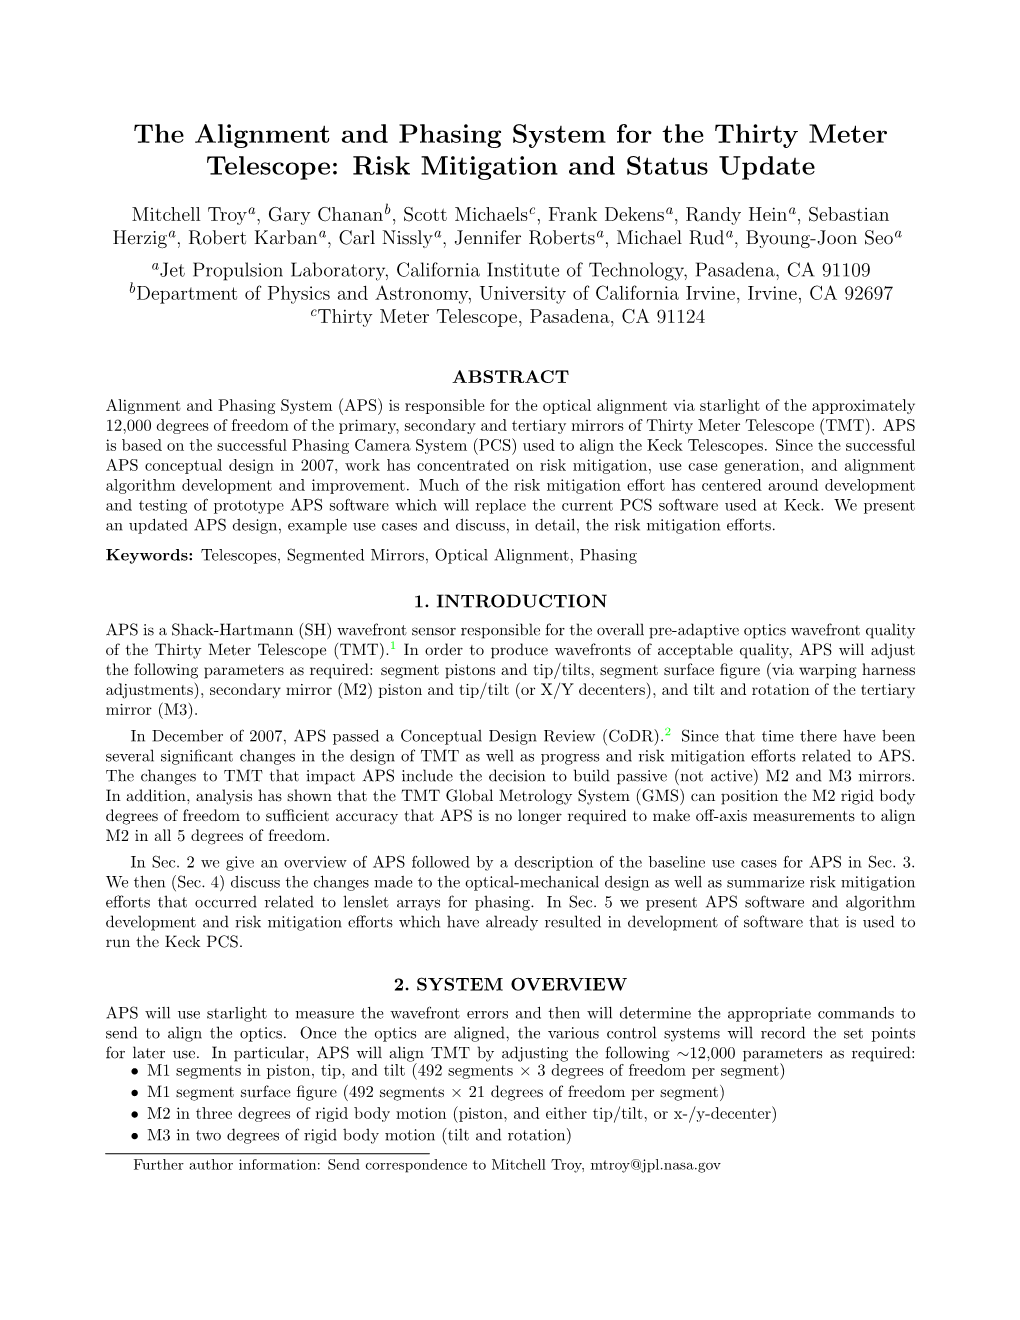 The Alignment and Phasing System for the Thirty Meter Telescope: Risk Mitigation and Status Update